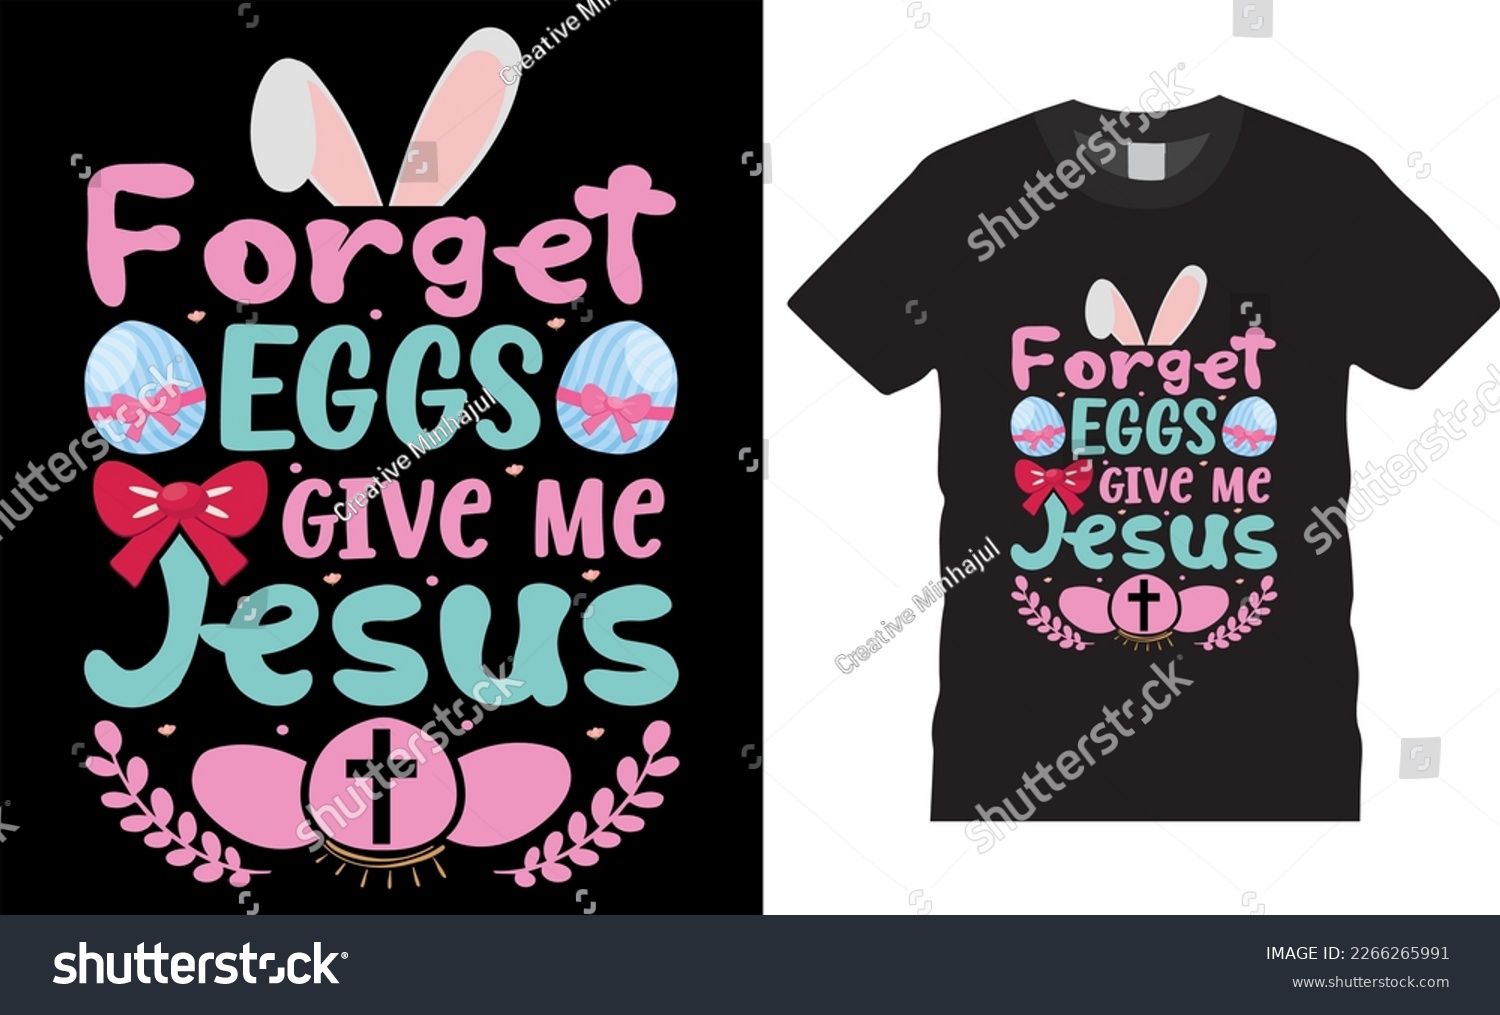 SVG of Happy easter rabbit, bunny tshirt vector design template.forget eggs give me jesus t-shirt design.Ready to print for apparel, poster, mug and greeting plate illustration svg